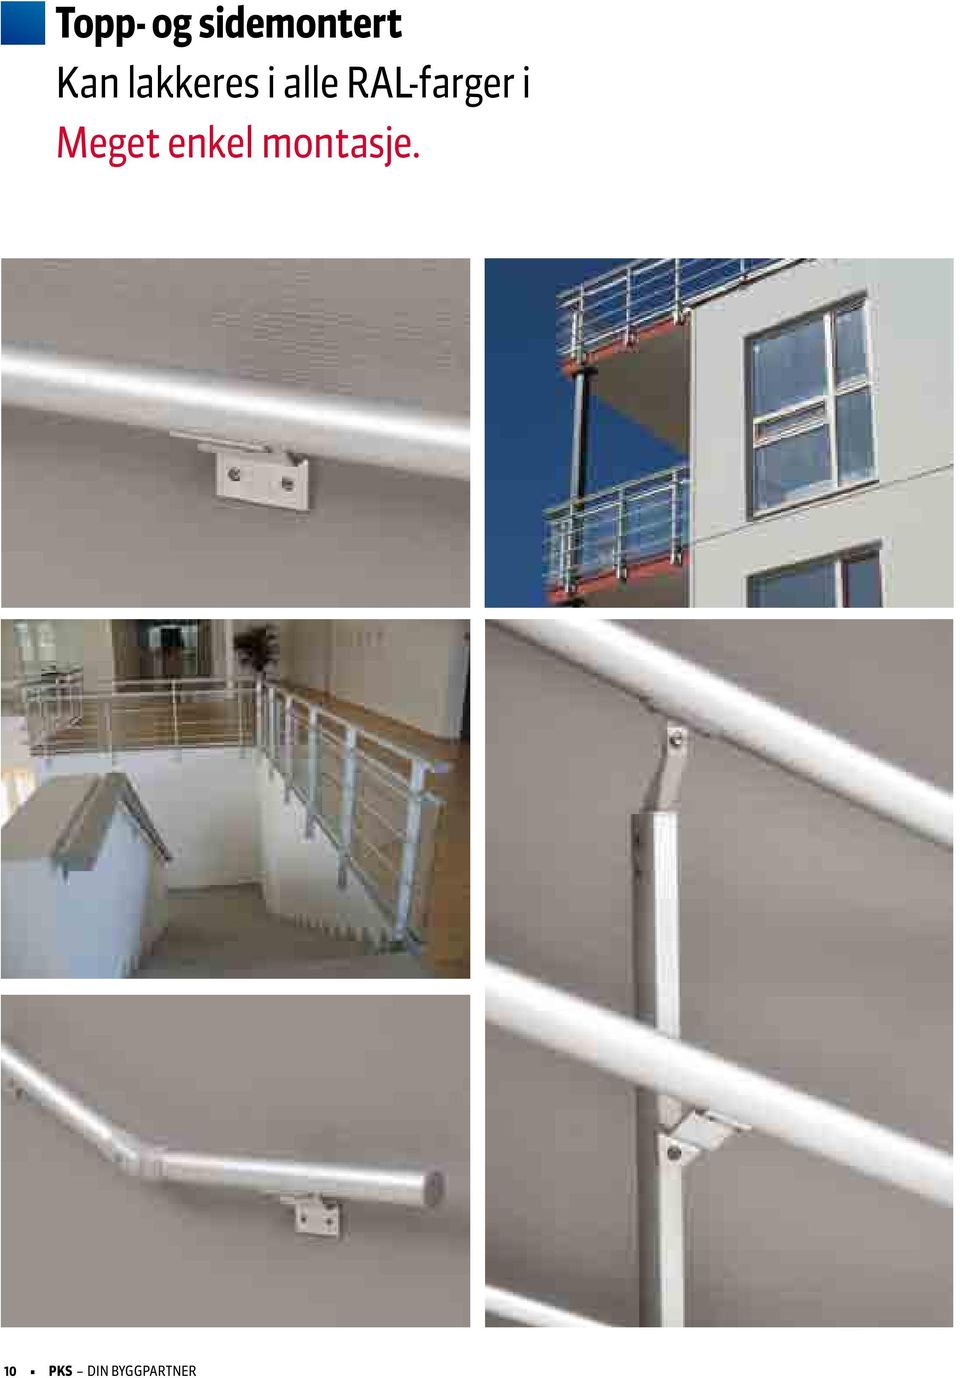 railing system is suitable for balconies, staircases and other terrace delimitations. Balu allows you to create different configurations balustrades systems.